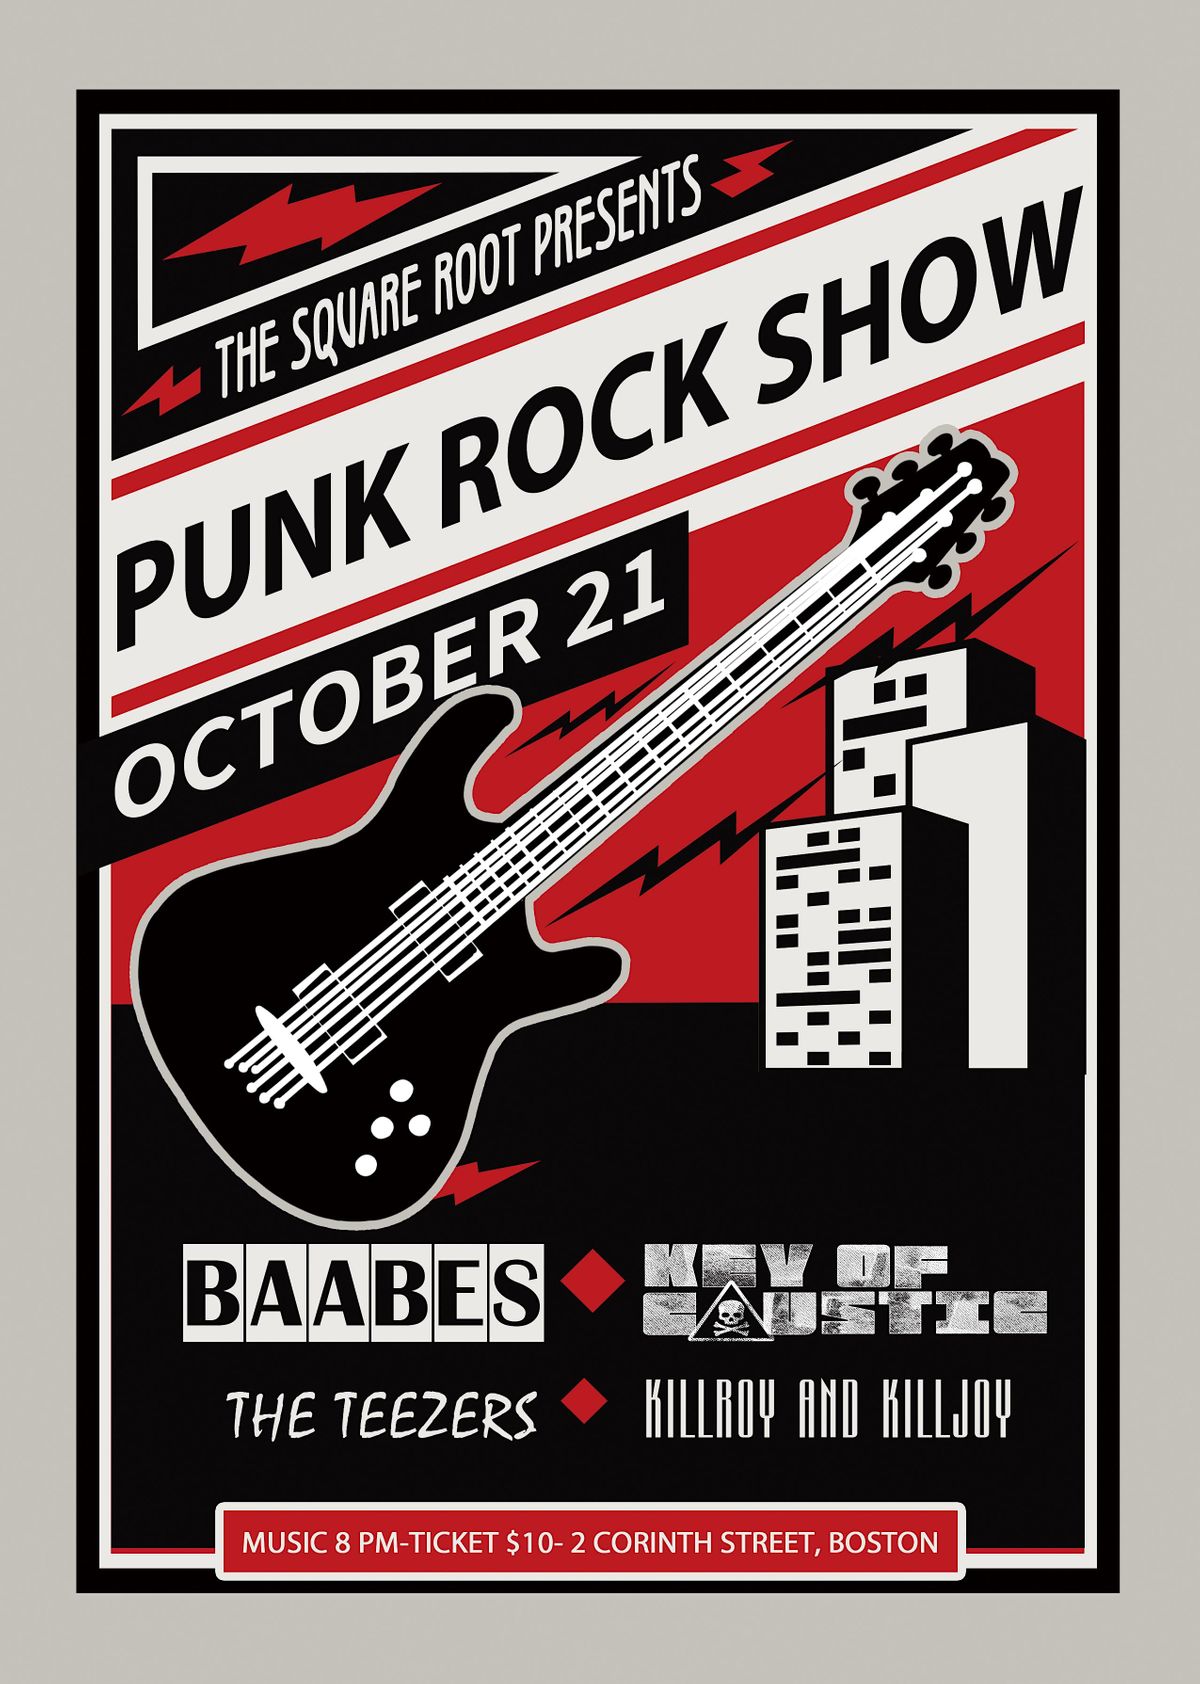 A Punk Rock Show, the Square Root, Boston, 21 October 2022